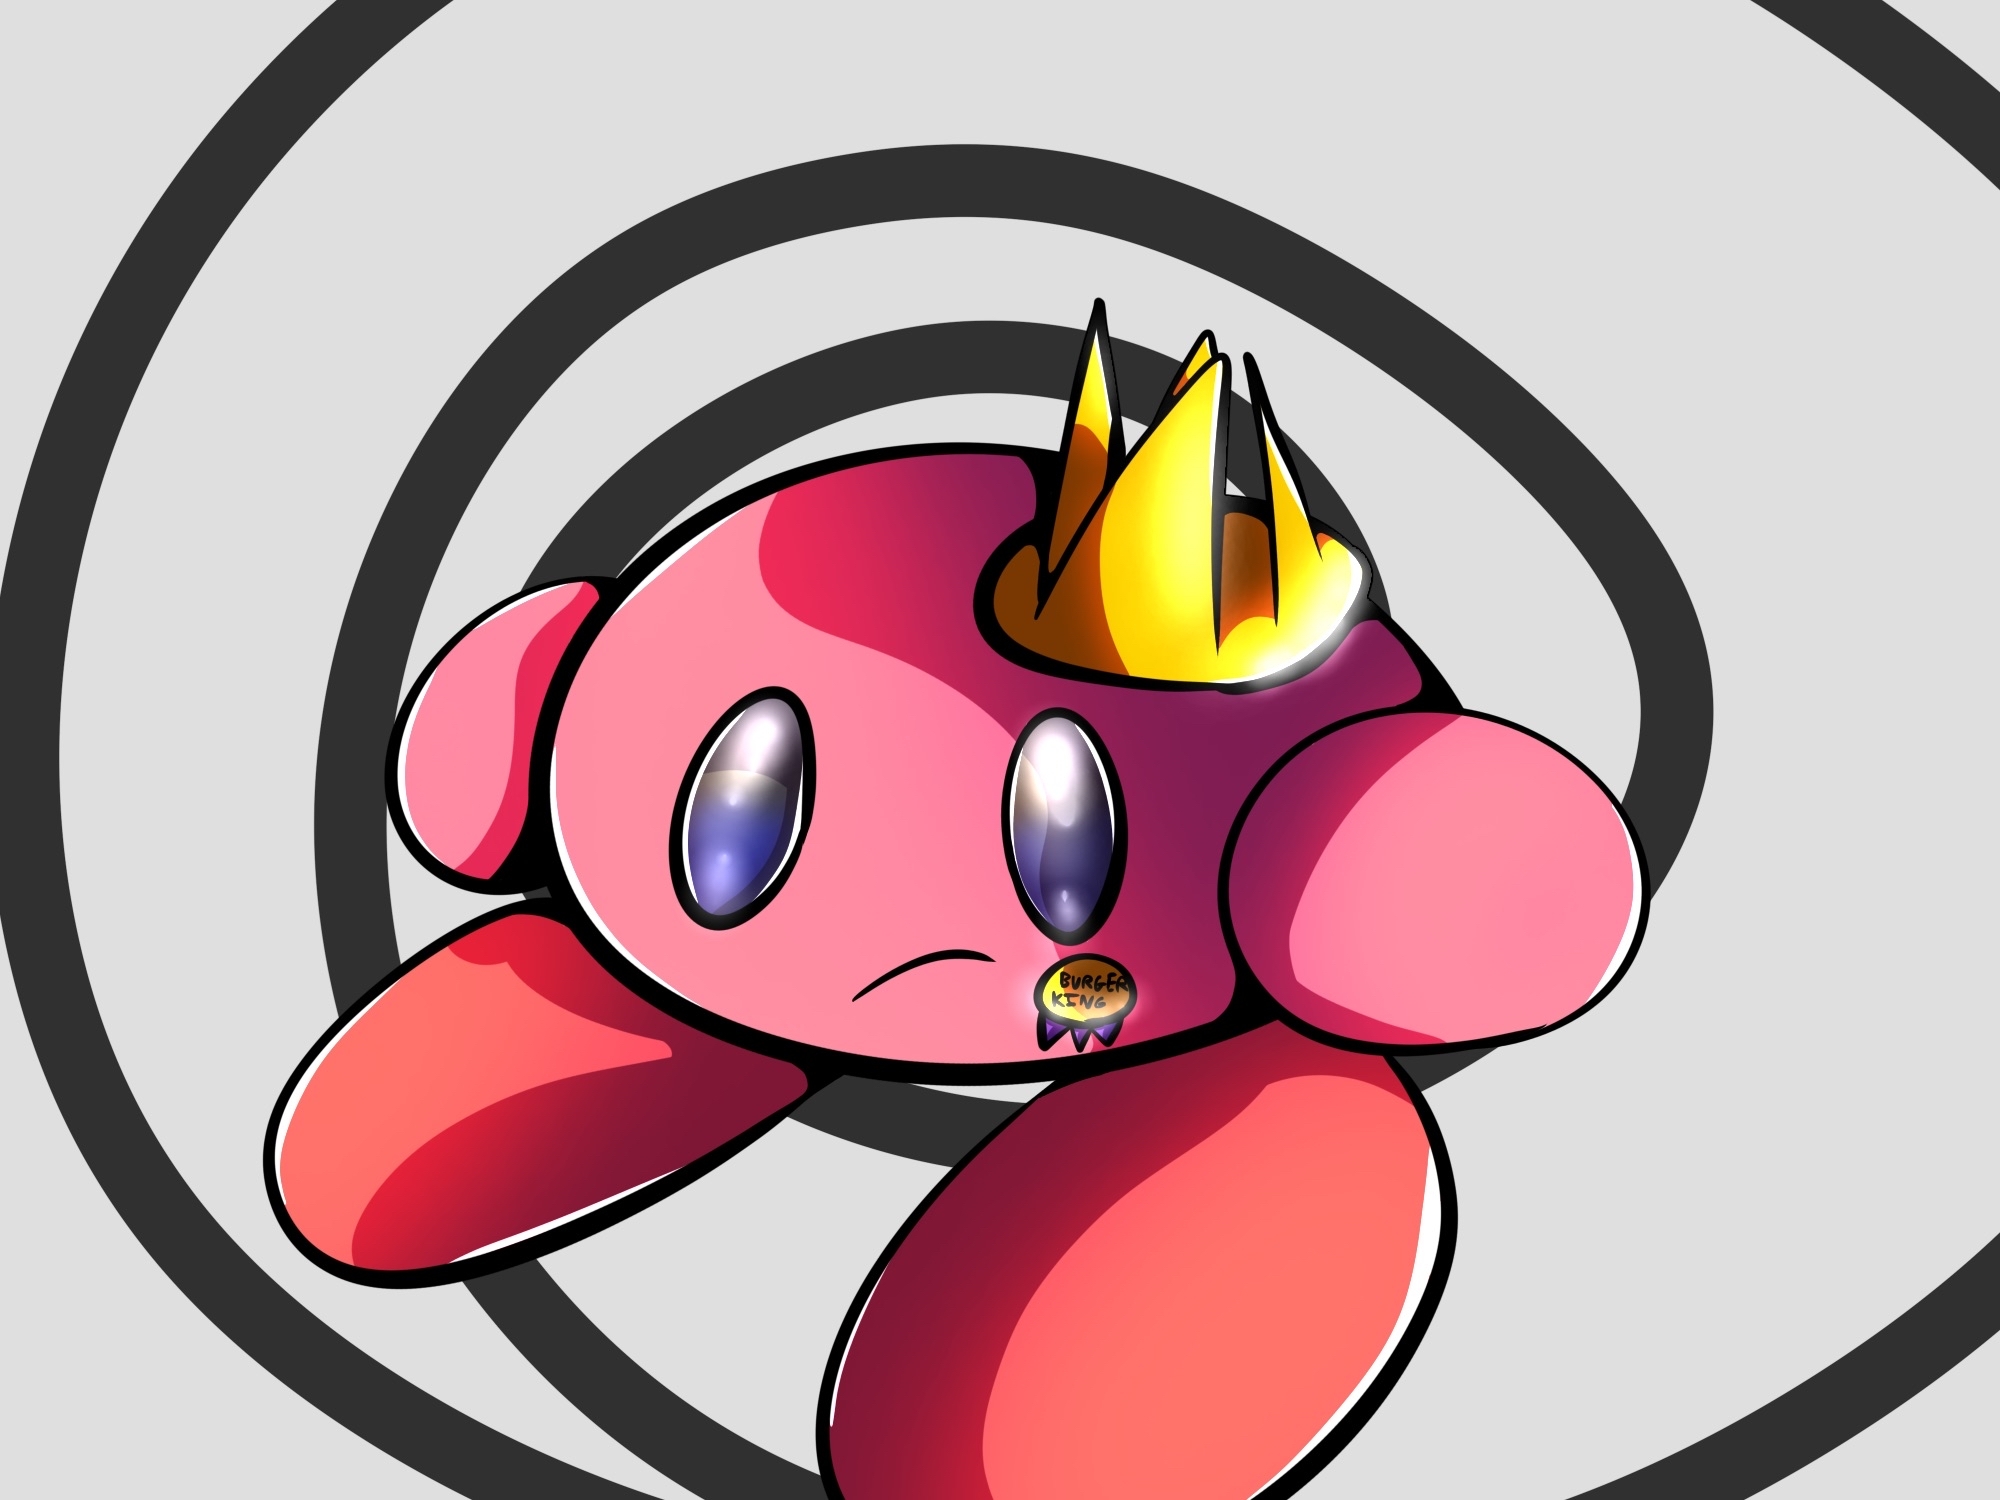 Kirby #1 Burger King Fan by The_Somnolent_Dragon -- Fur Affinity [dot] net